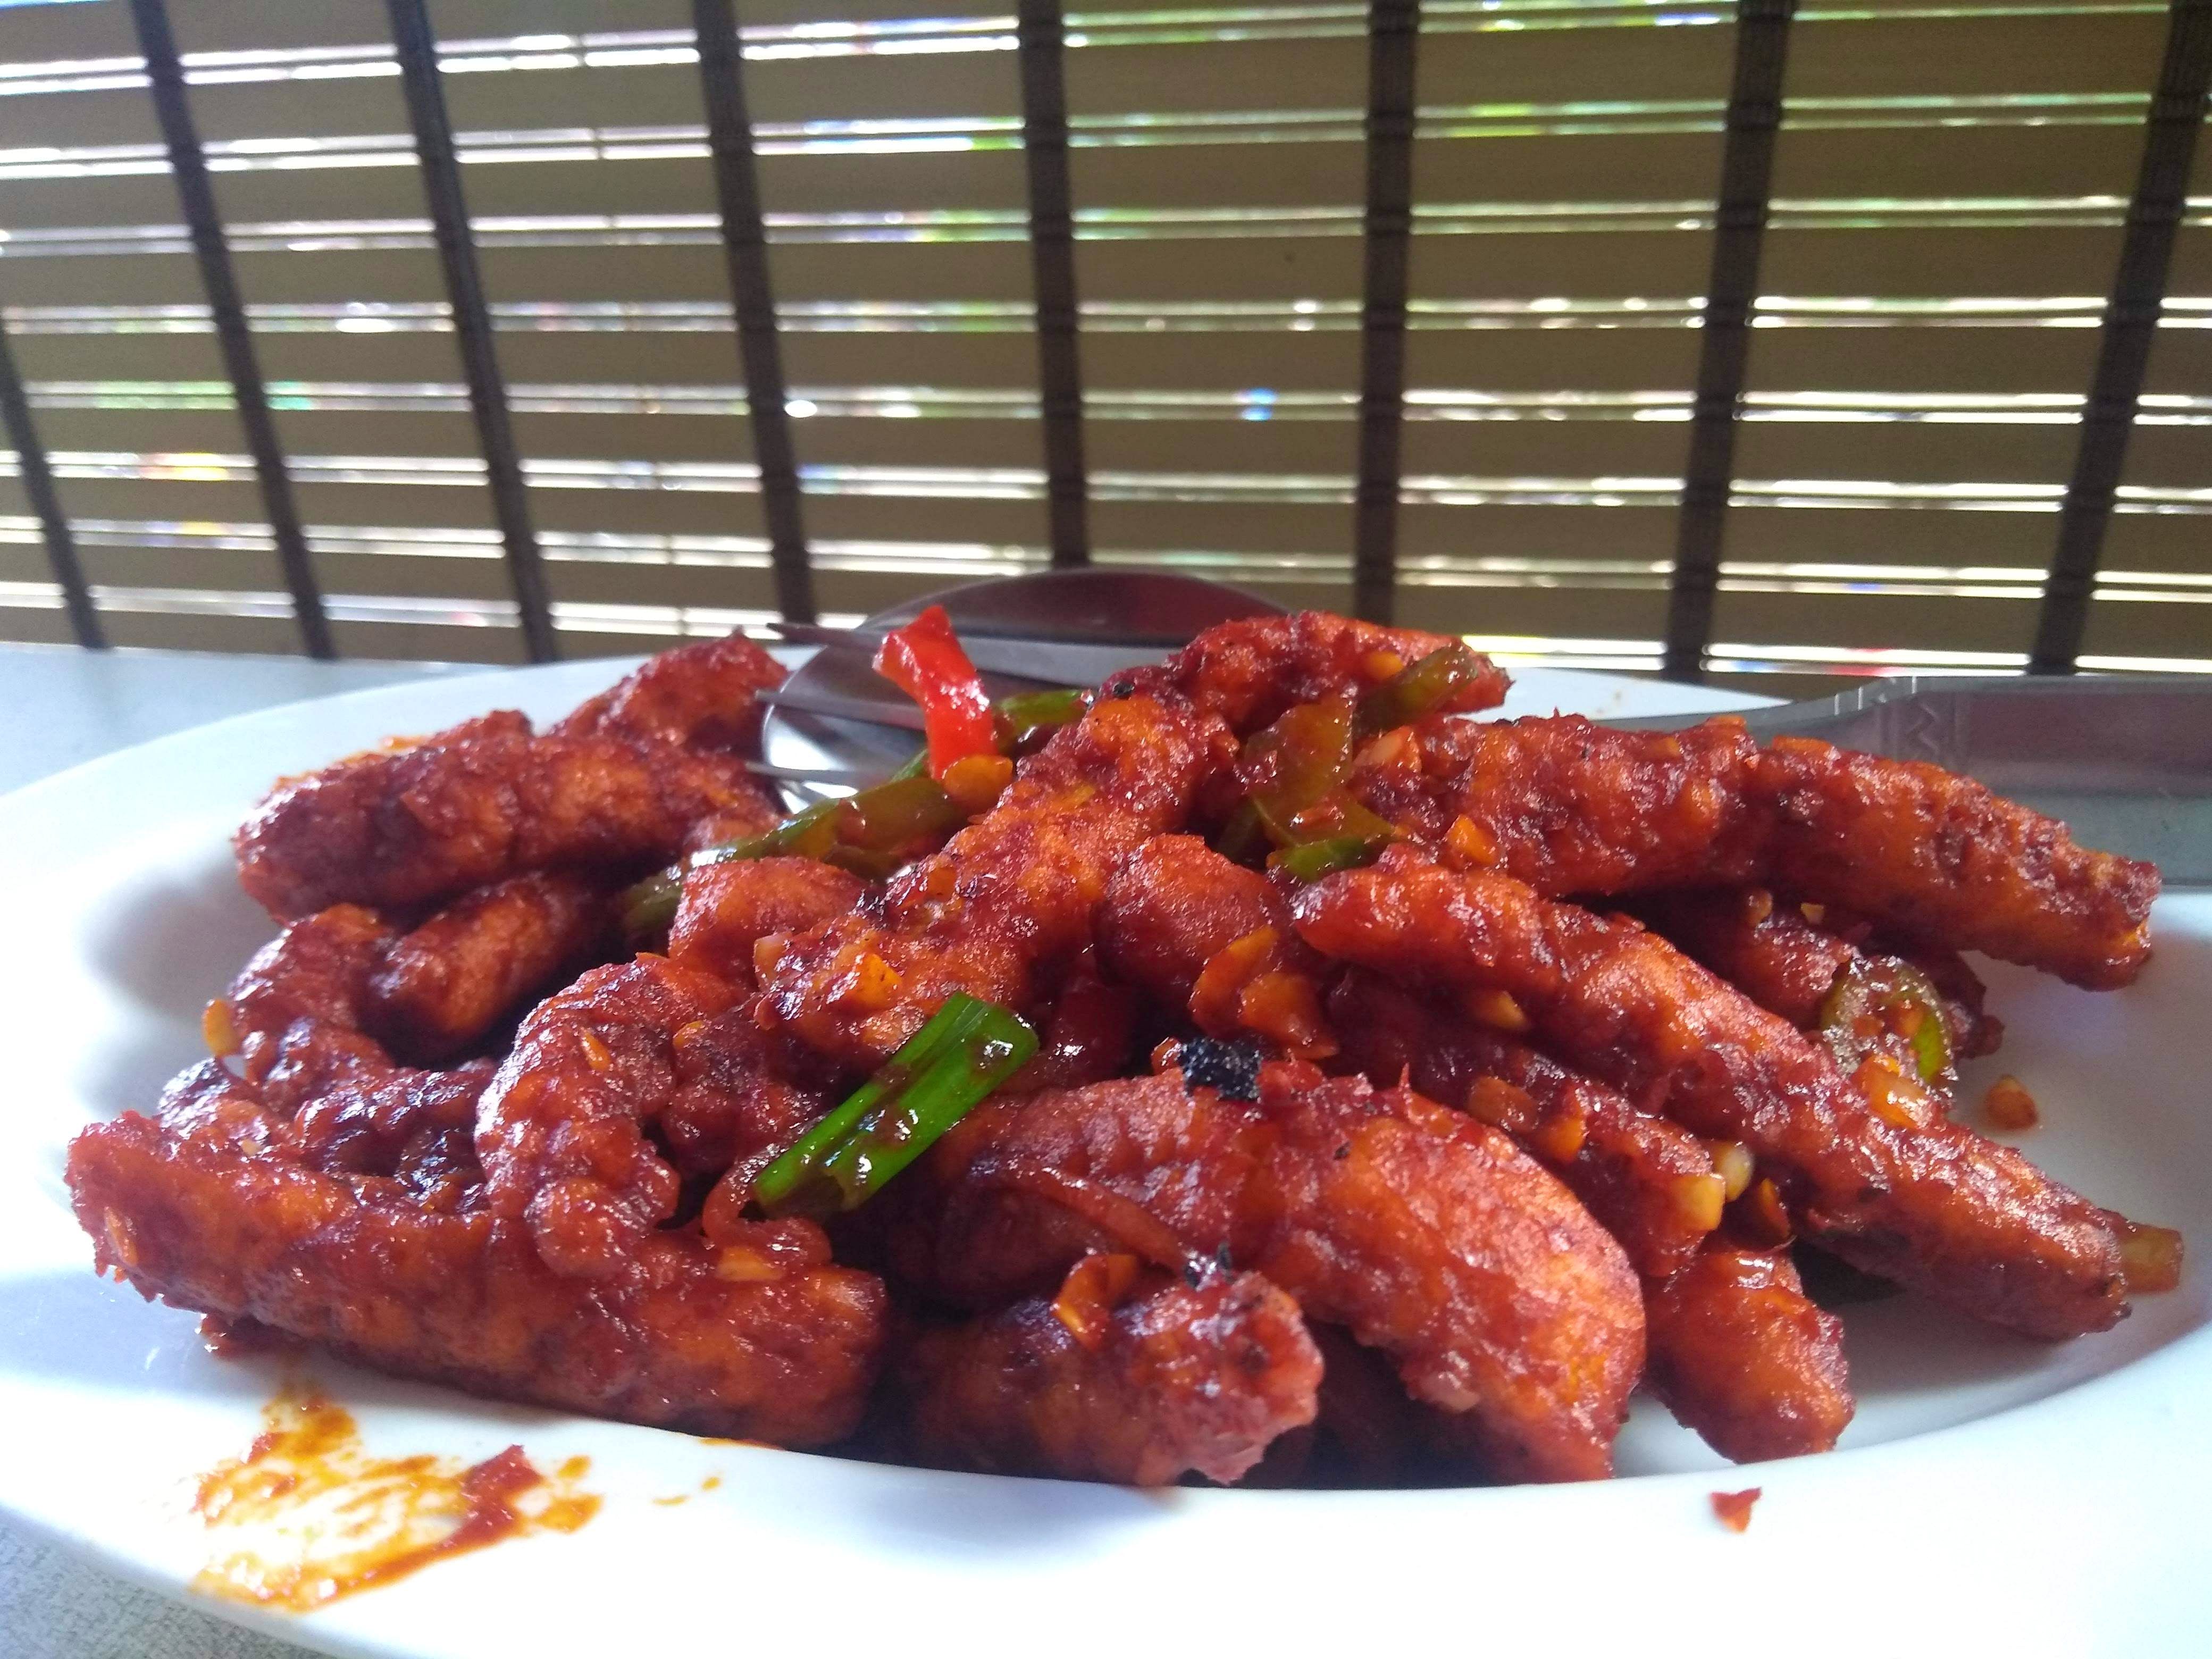 Dish,Food,Cuisine,Ingredient,General tso's chicken,Meat,Sweet and sour chicken,Fried food,Produce,Sweet and sour